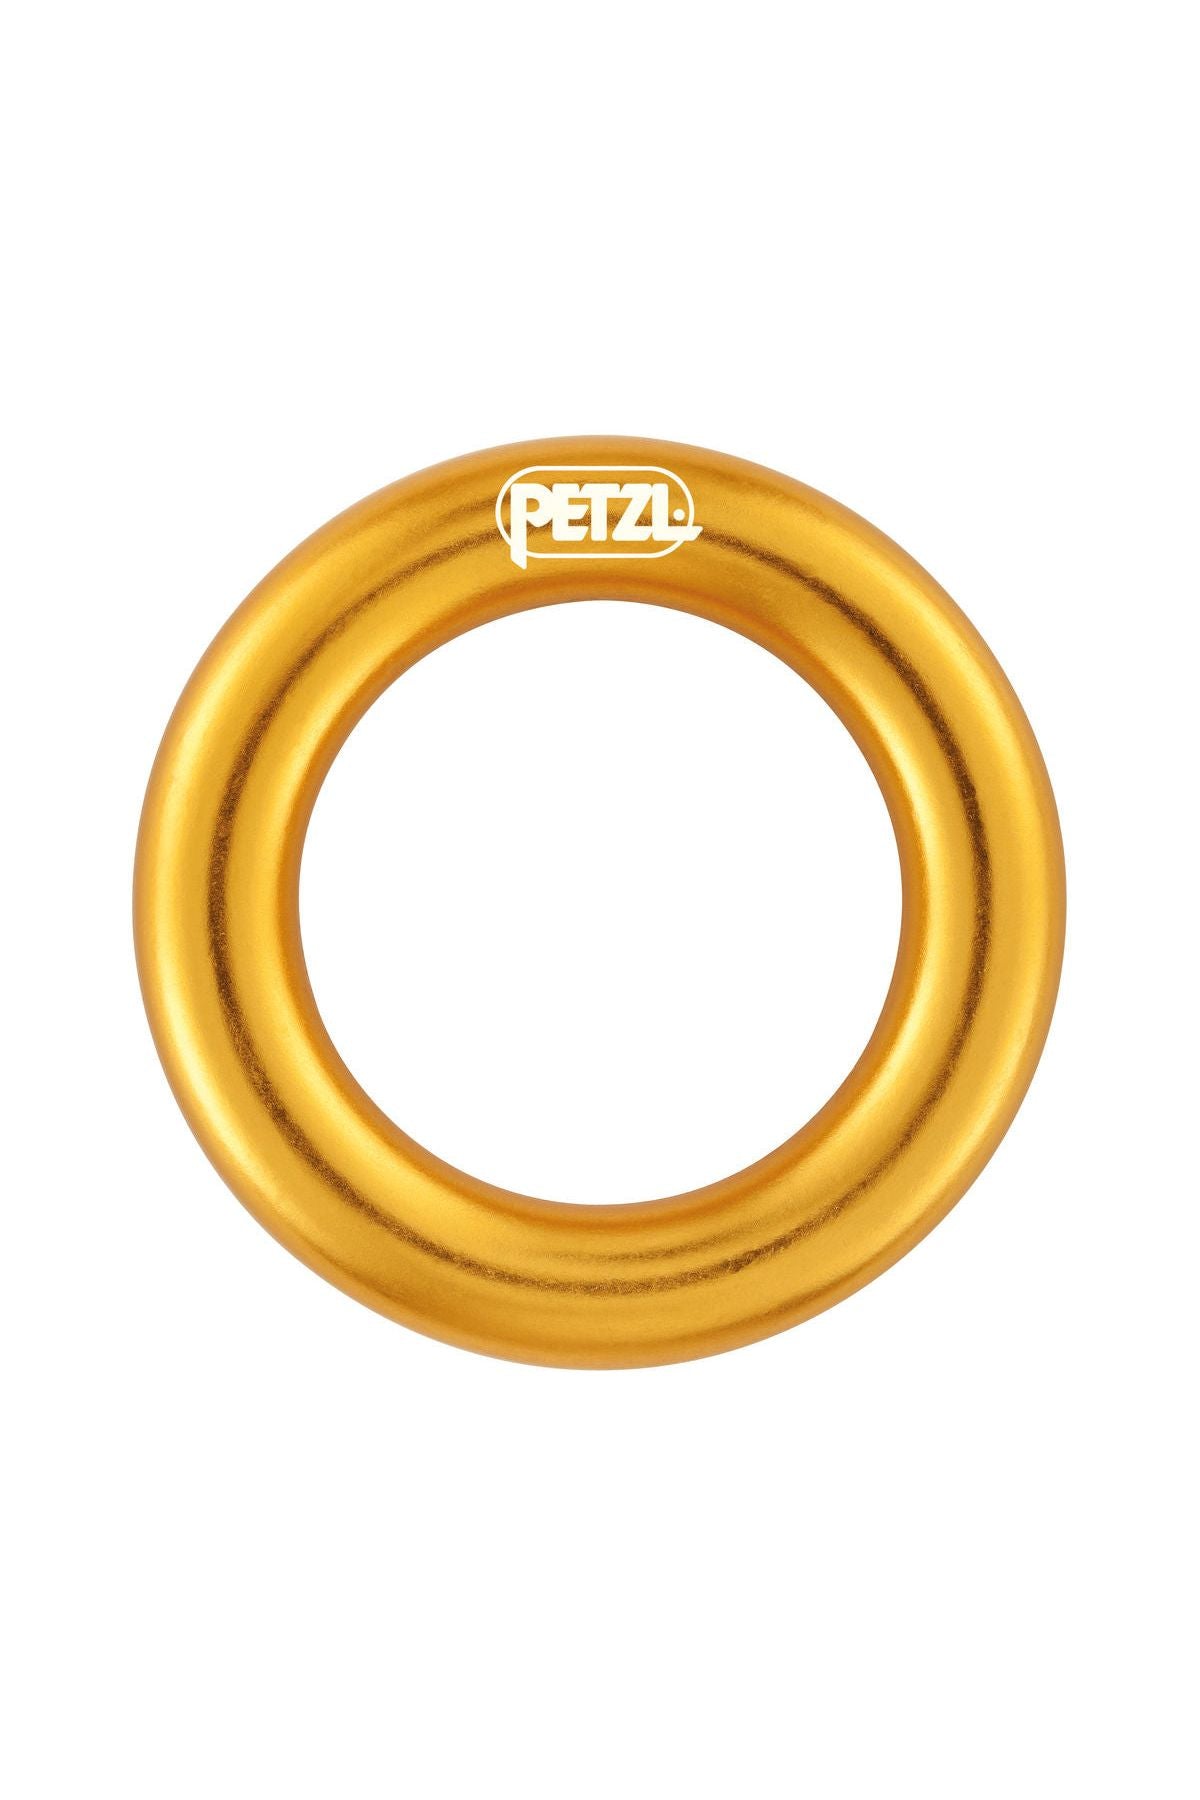 Petzl Connection Ring - Anton's Timber